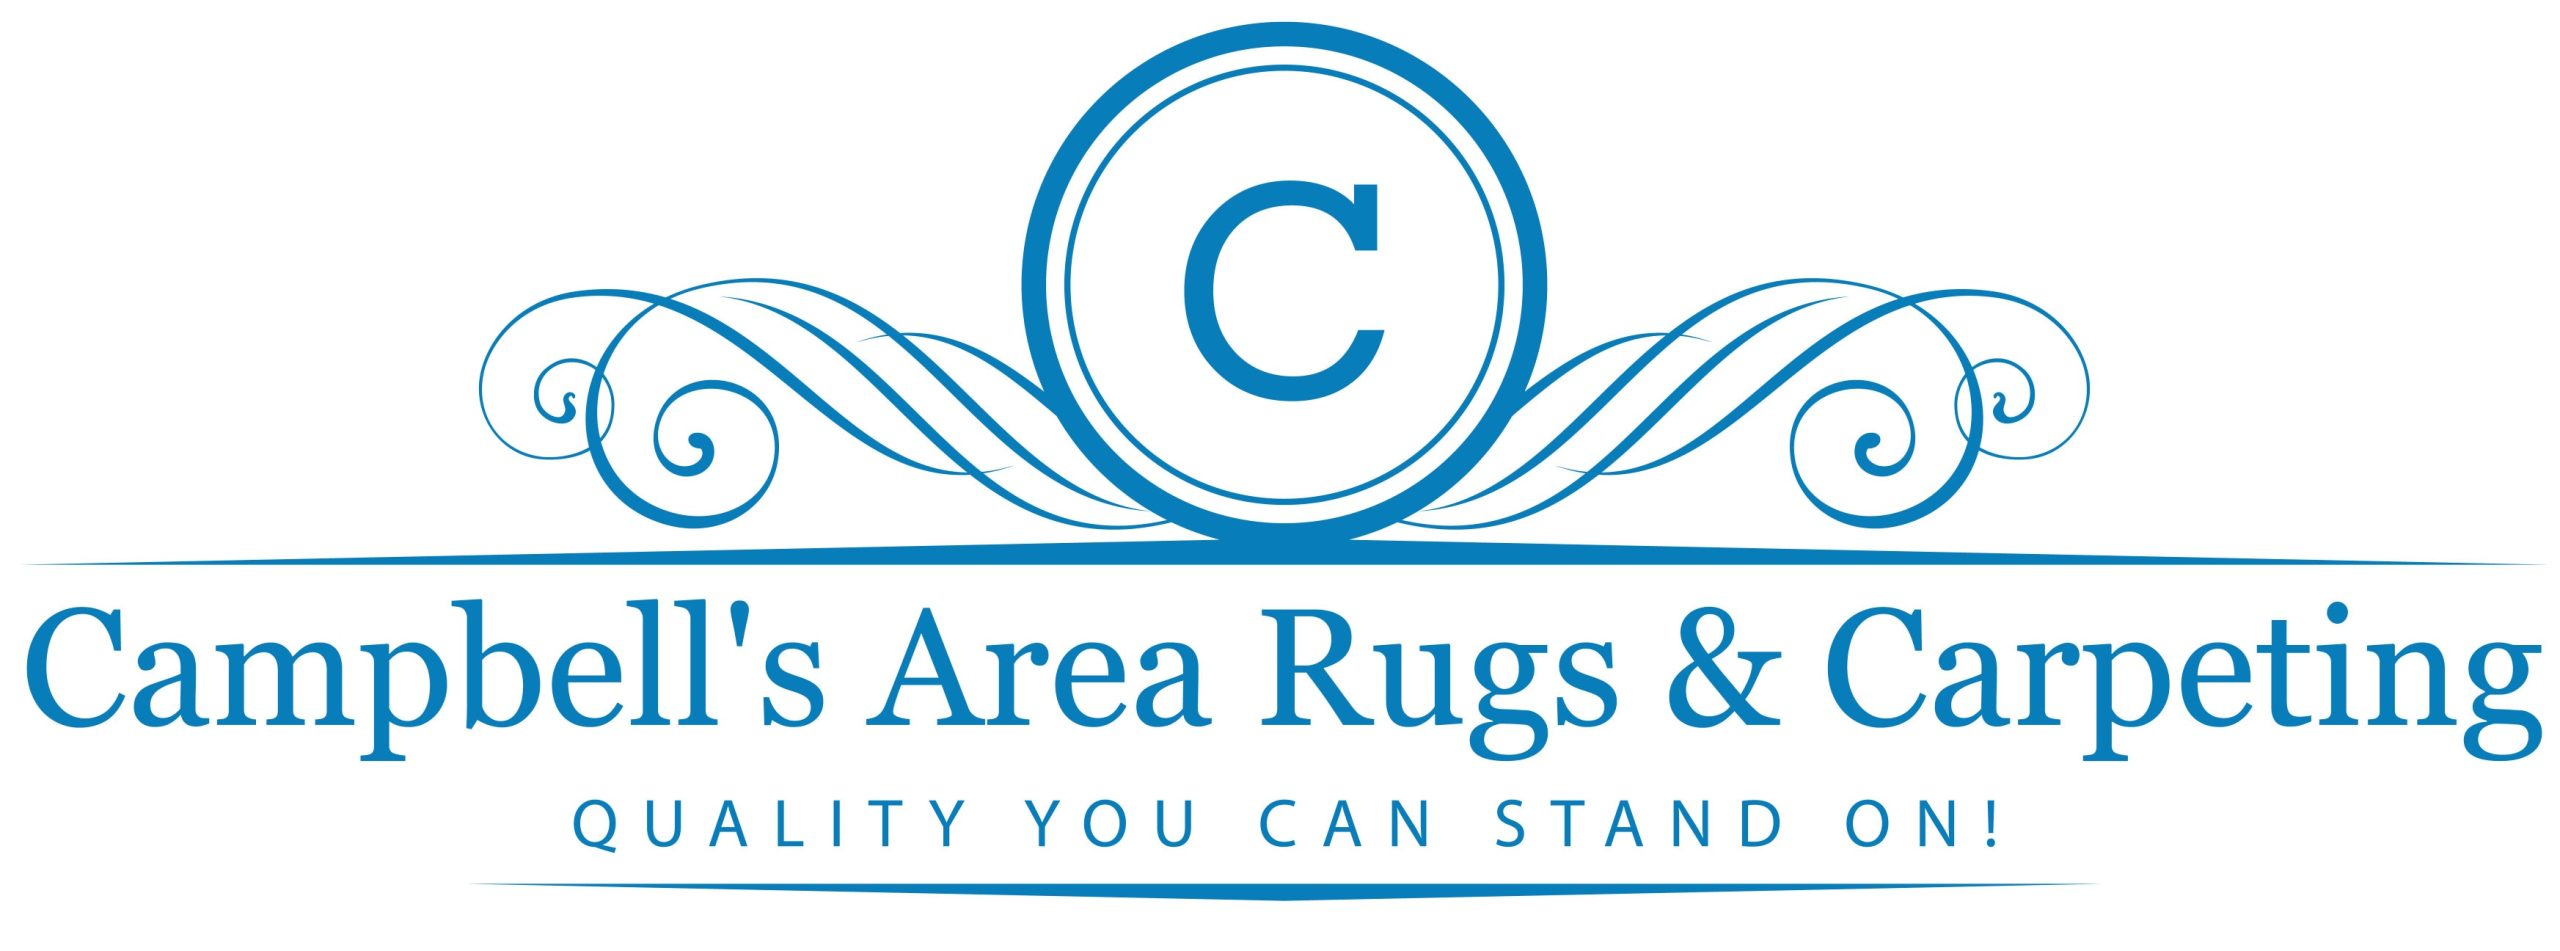 Campbell’s Area Rugs & Carpeting